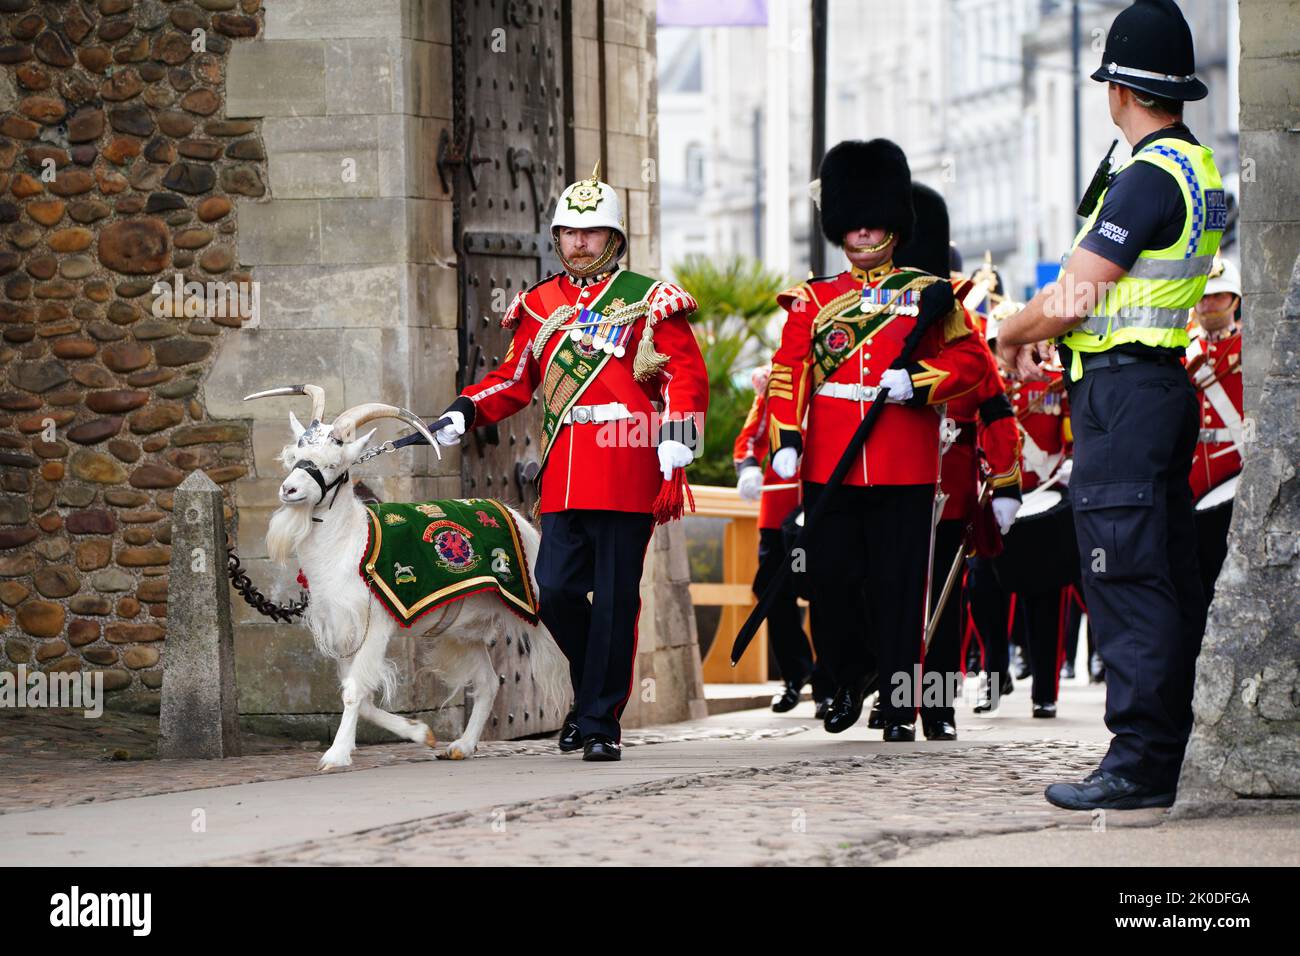 Lance Corporal Shenkin IV, the regimental mascot goat, accompanies the 3rd Battalion of the Royal Welsh regiment at the Accession Proclamation Ceremony at Cardiff Castle, Wales, publicly proclaiming King Charles III as the new monarch. Picture date: Sunday September 11, 2022. Stock Photo